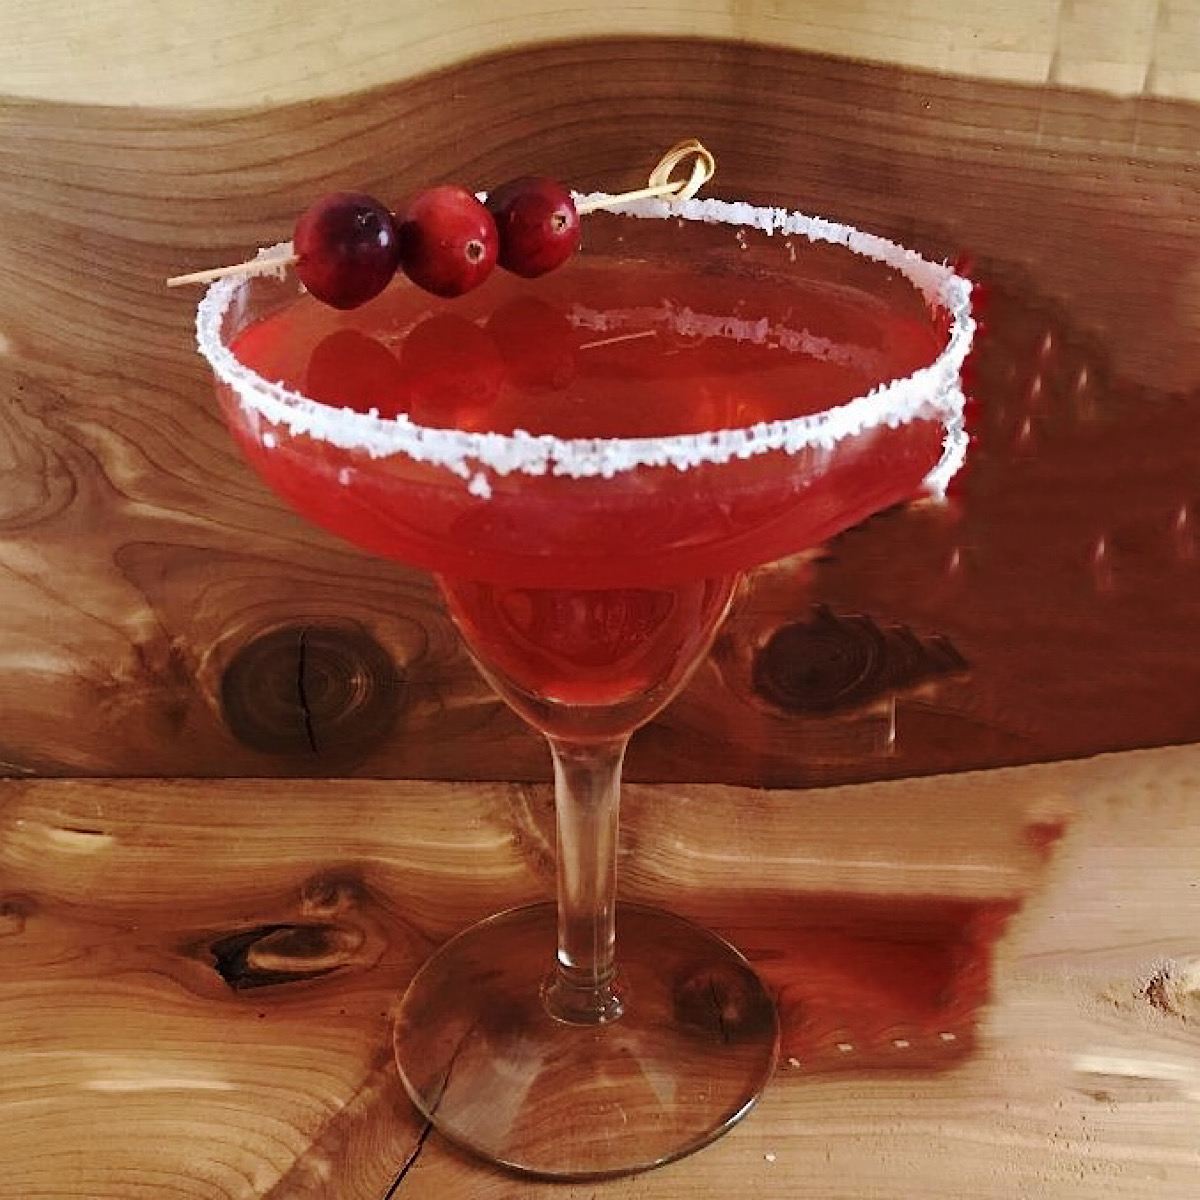 Spicy cranberry margarita with salted rim and 3 cranberries as a garnish.